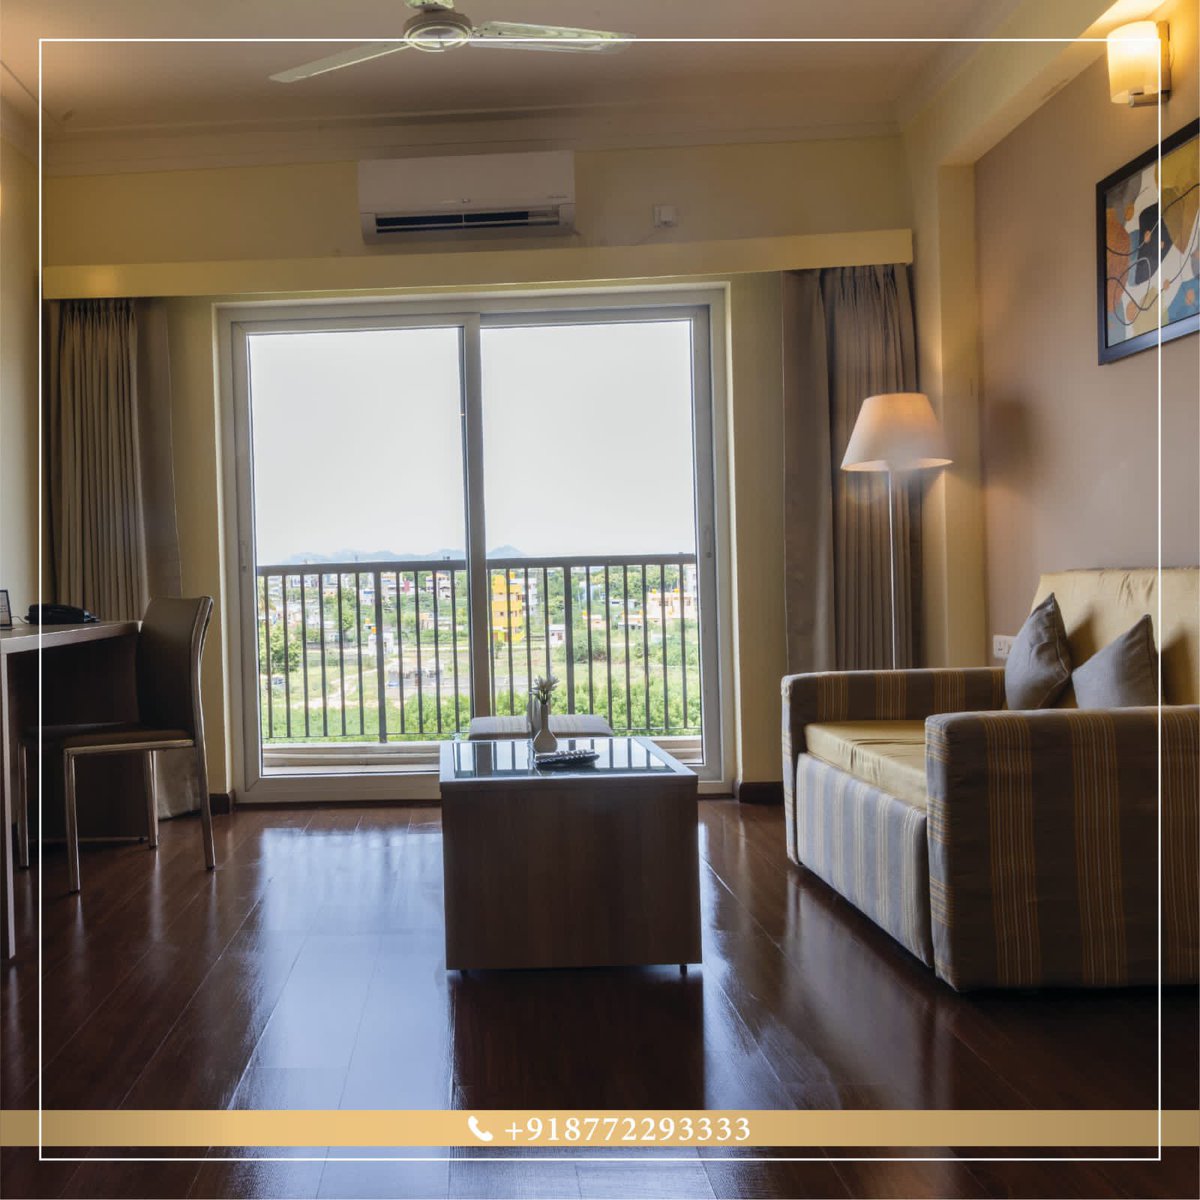 Picture yourself on a relaxed vacation here! Take a break from routine and enjoy your staycation at Starlit Suites Tirupati - your home away from home! For inquiries and reservation contact us - ➡️info@starlitsuites.com 📞 +918772293333 Tirupati 📞 +91 98712 80999